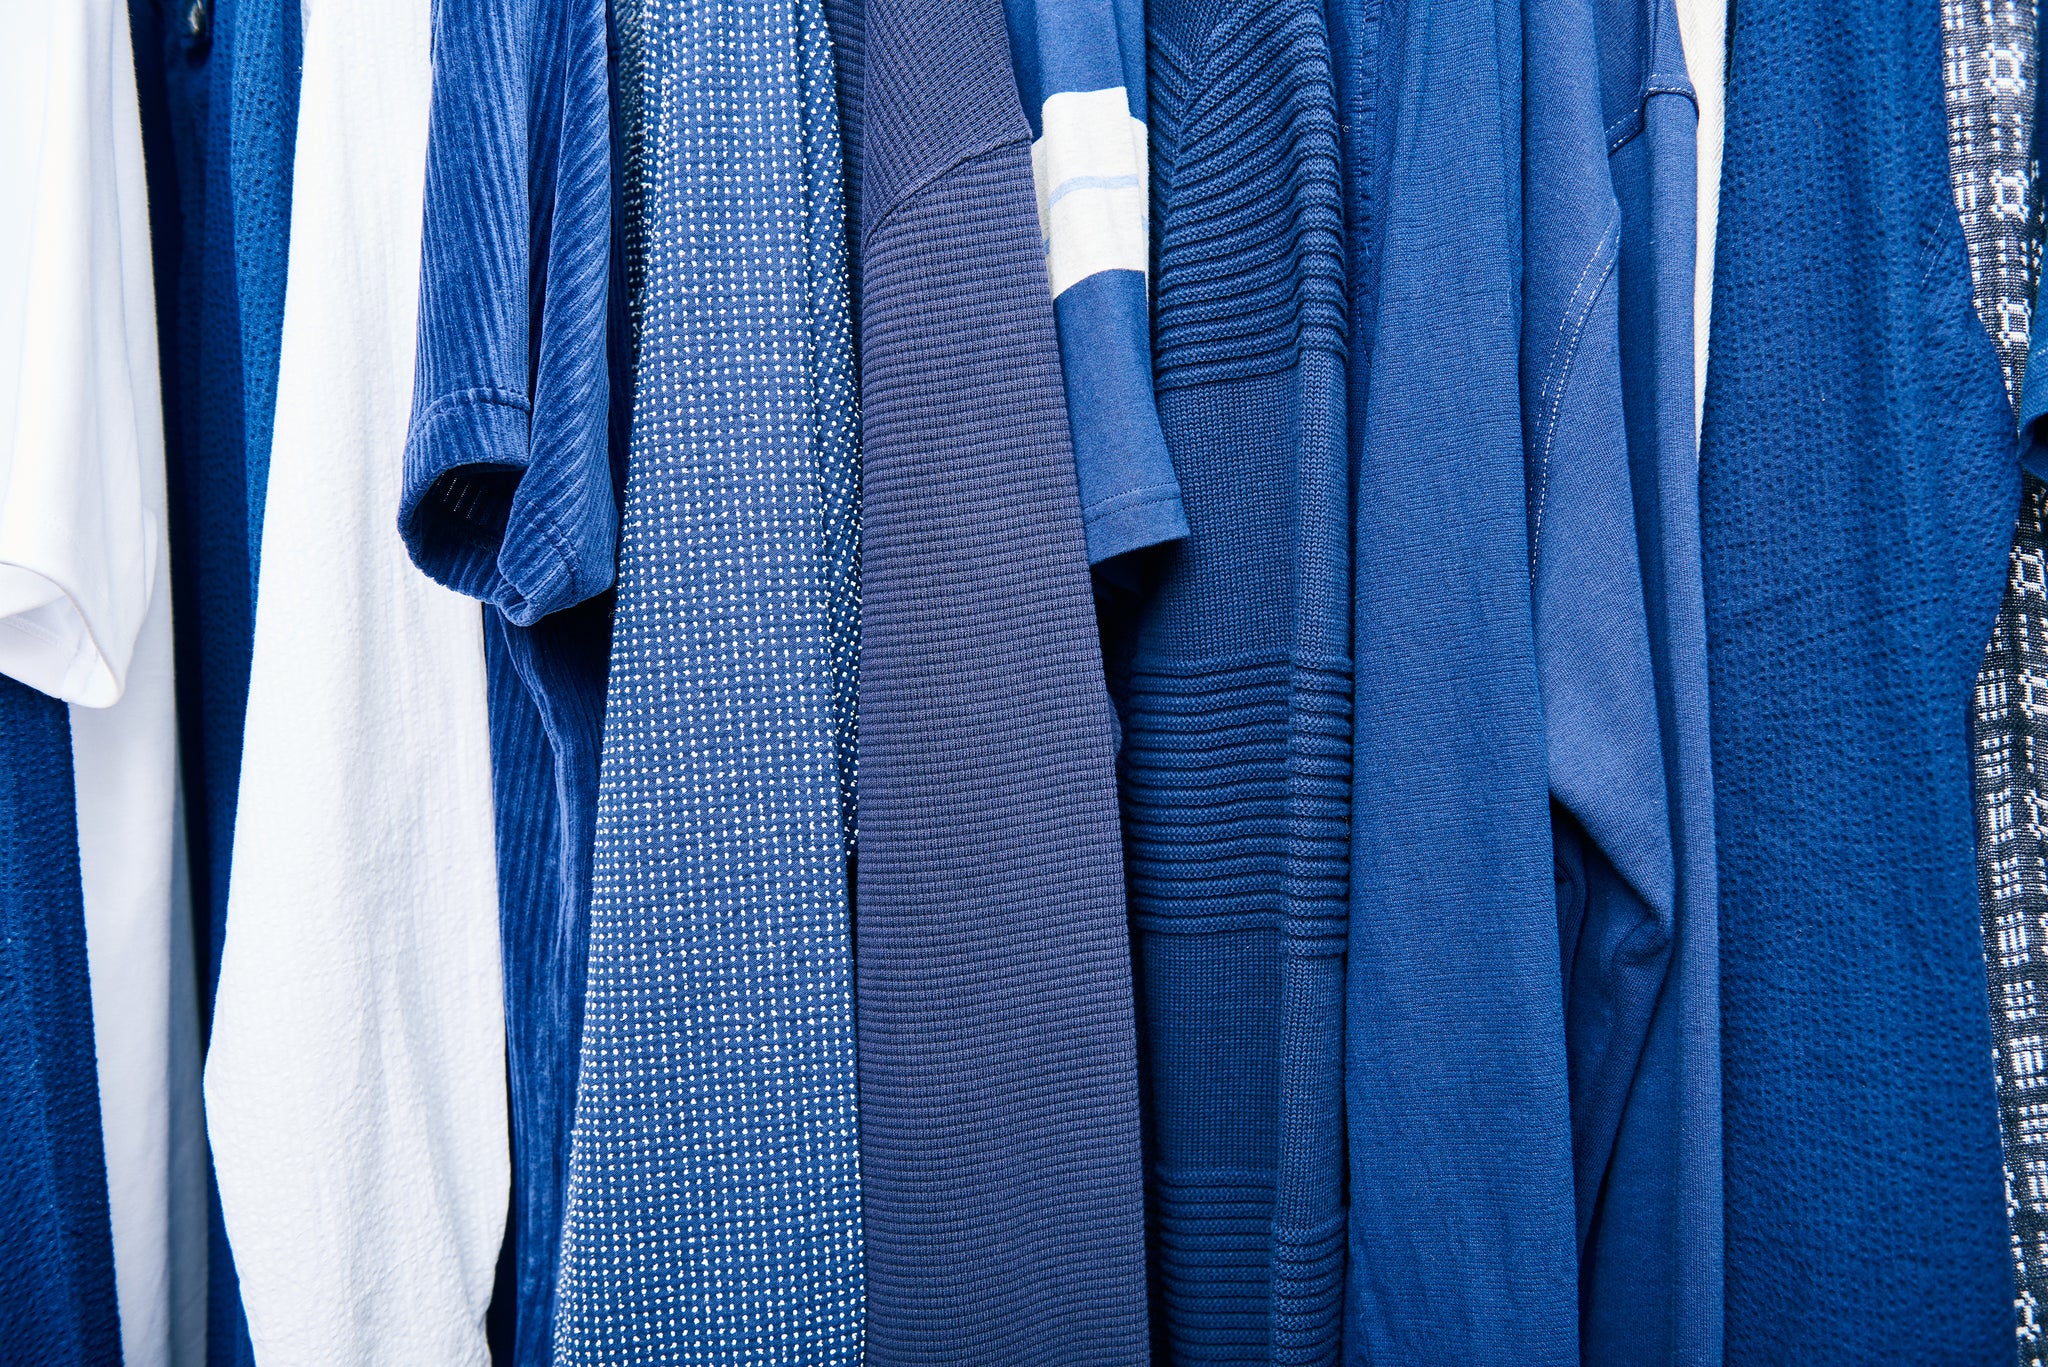 Blue shirts on a rack from Oliver Spencer with some white shirts as well interviewed by A Collected Man London